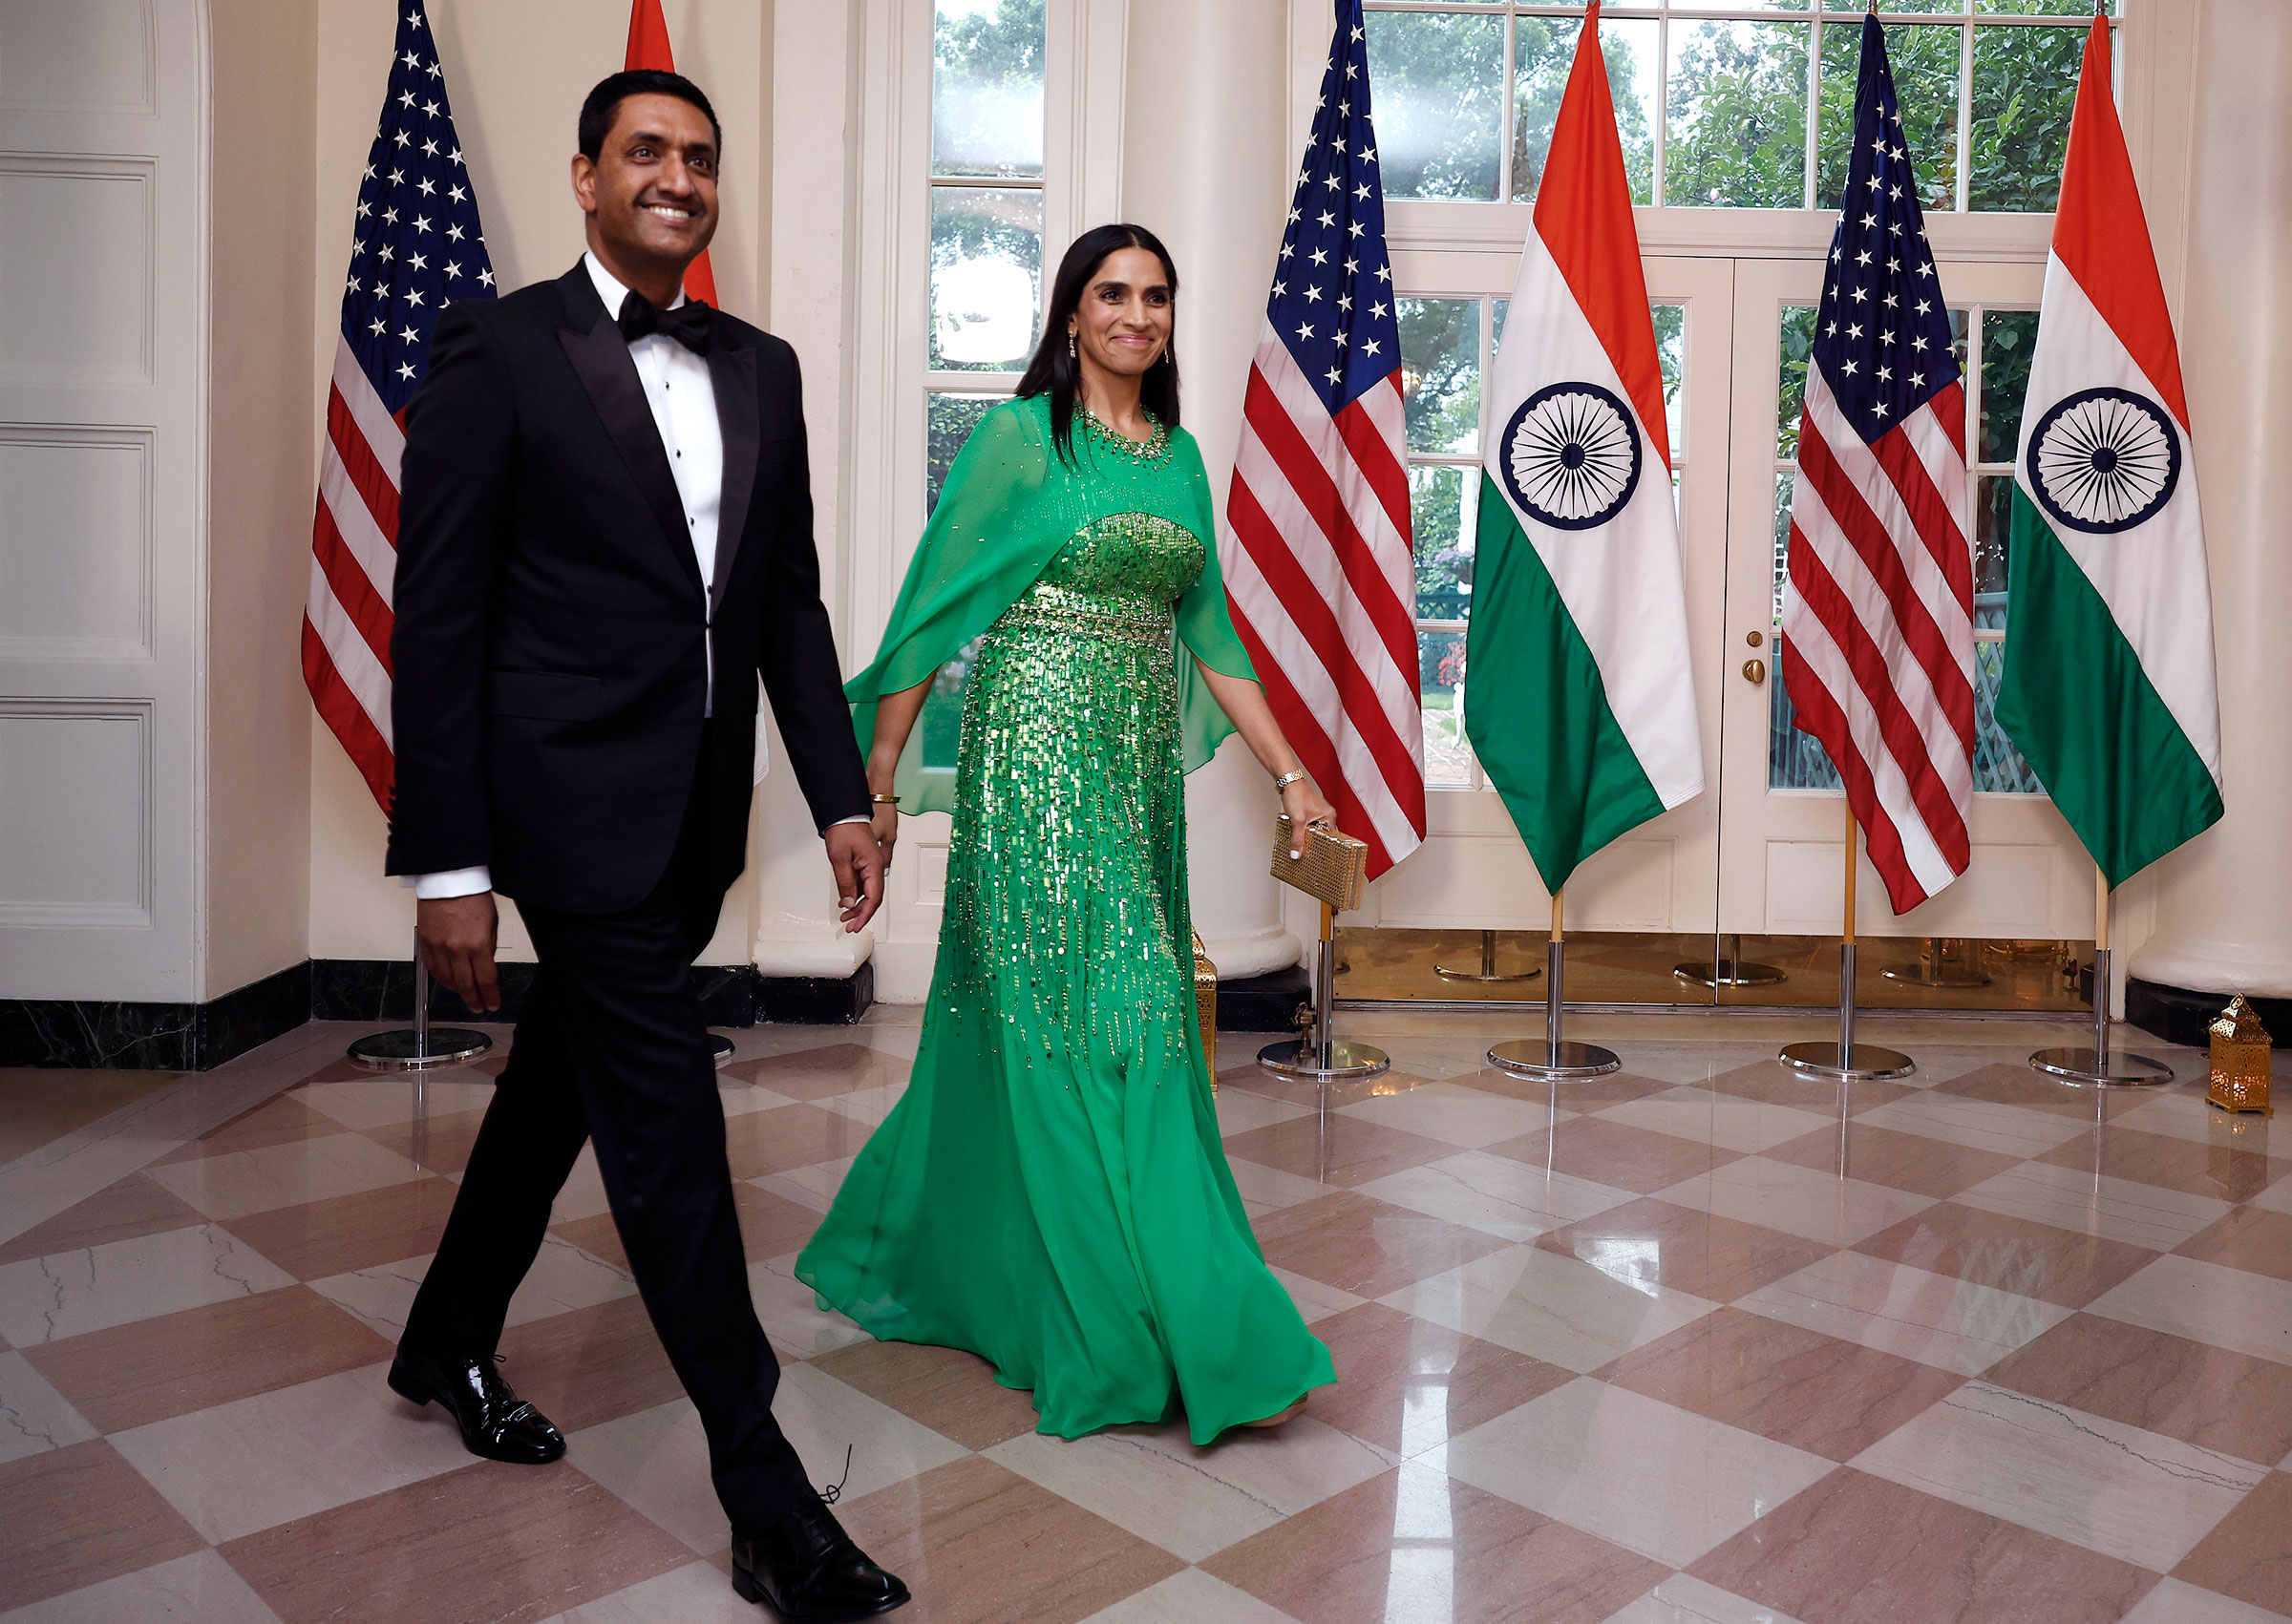 Ro Khanna enters an event holding his wife